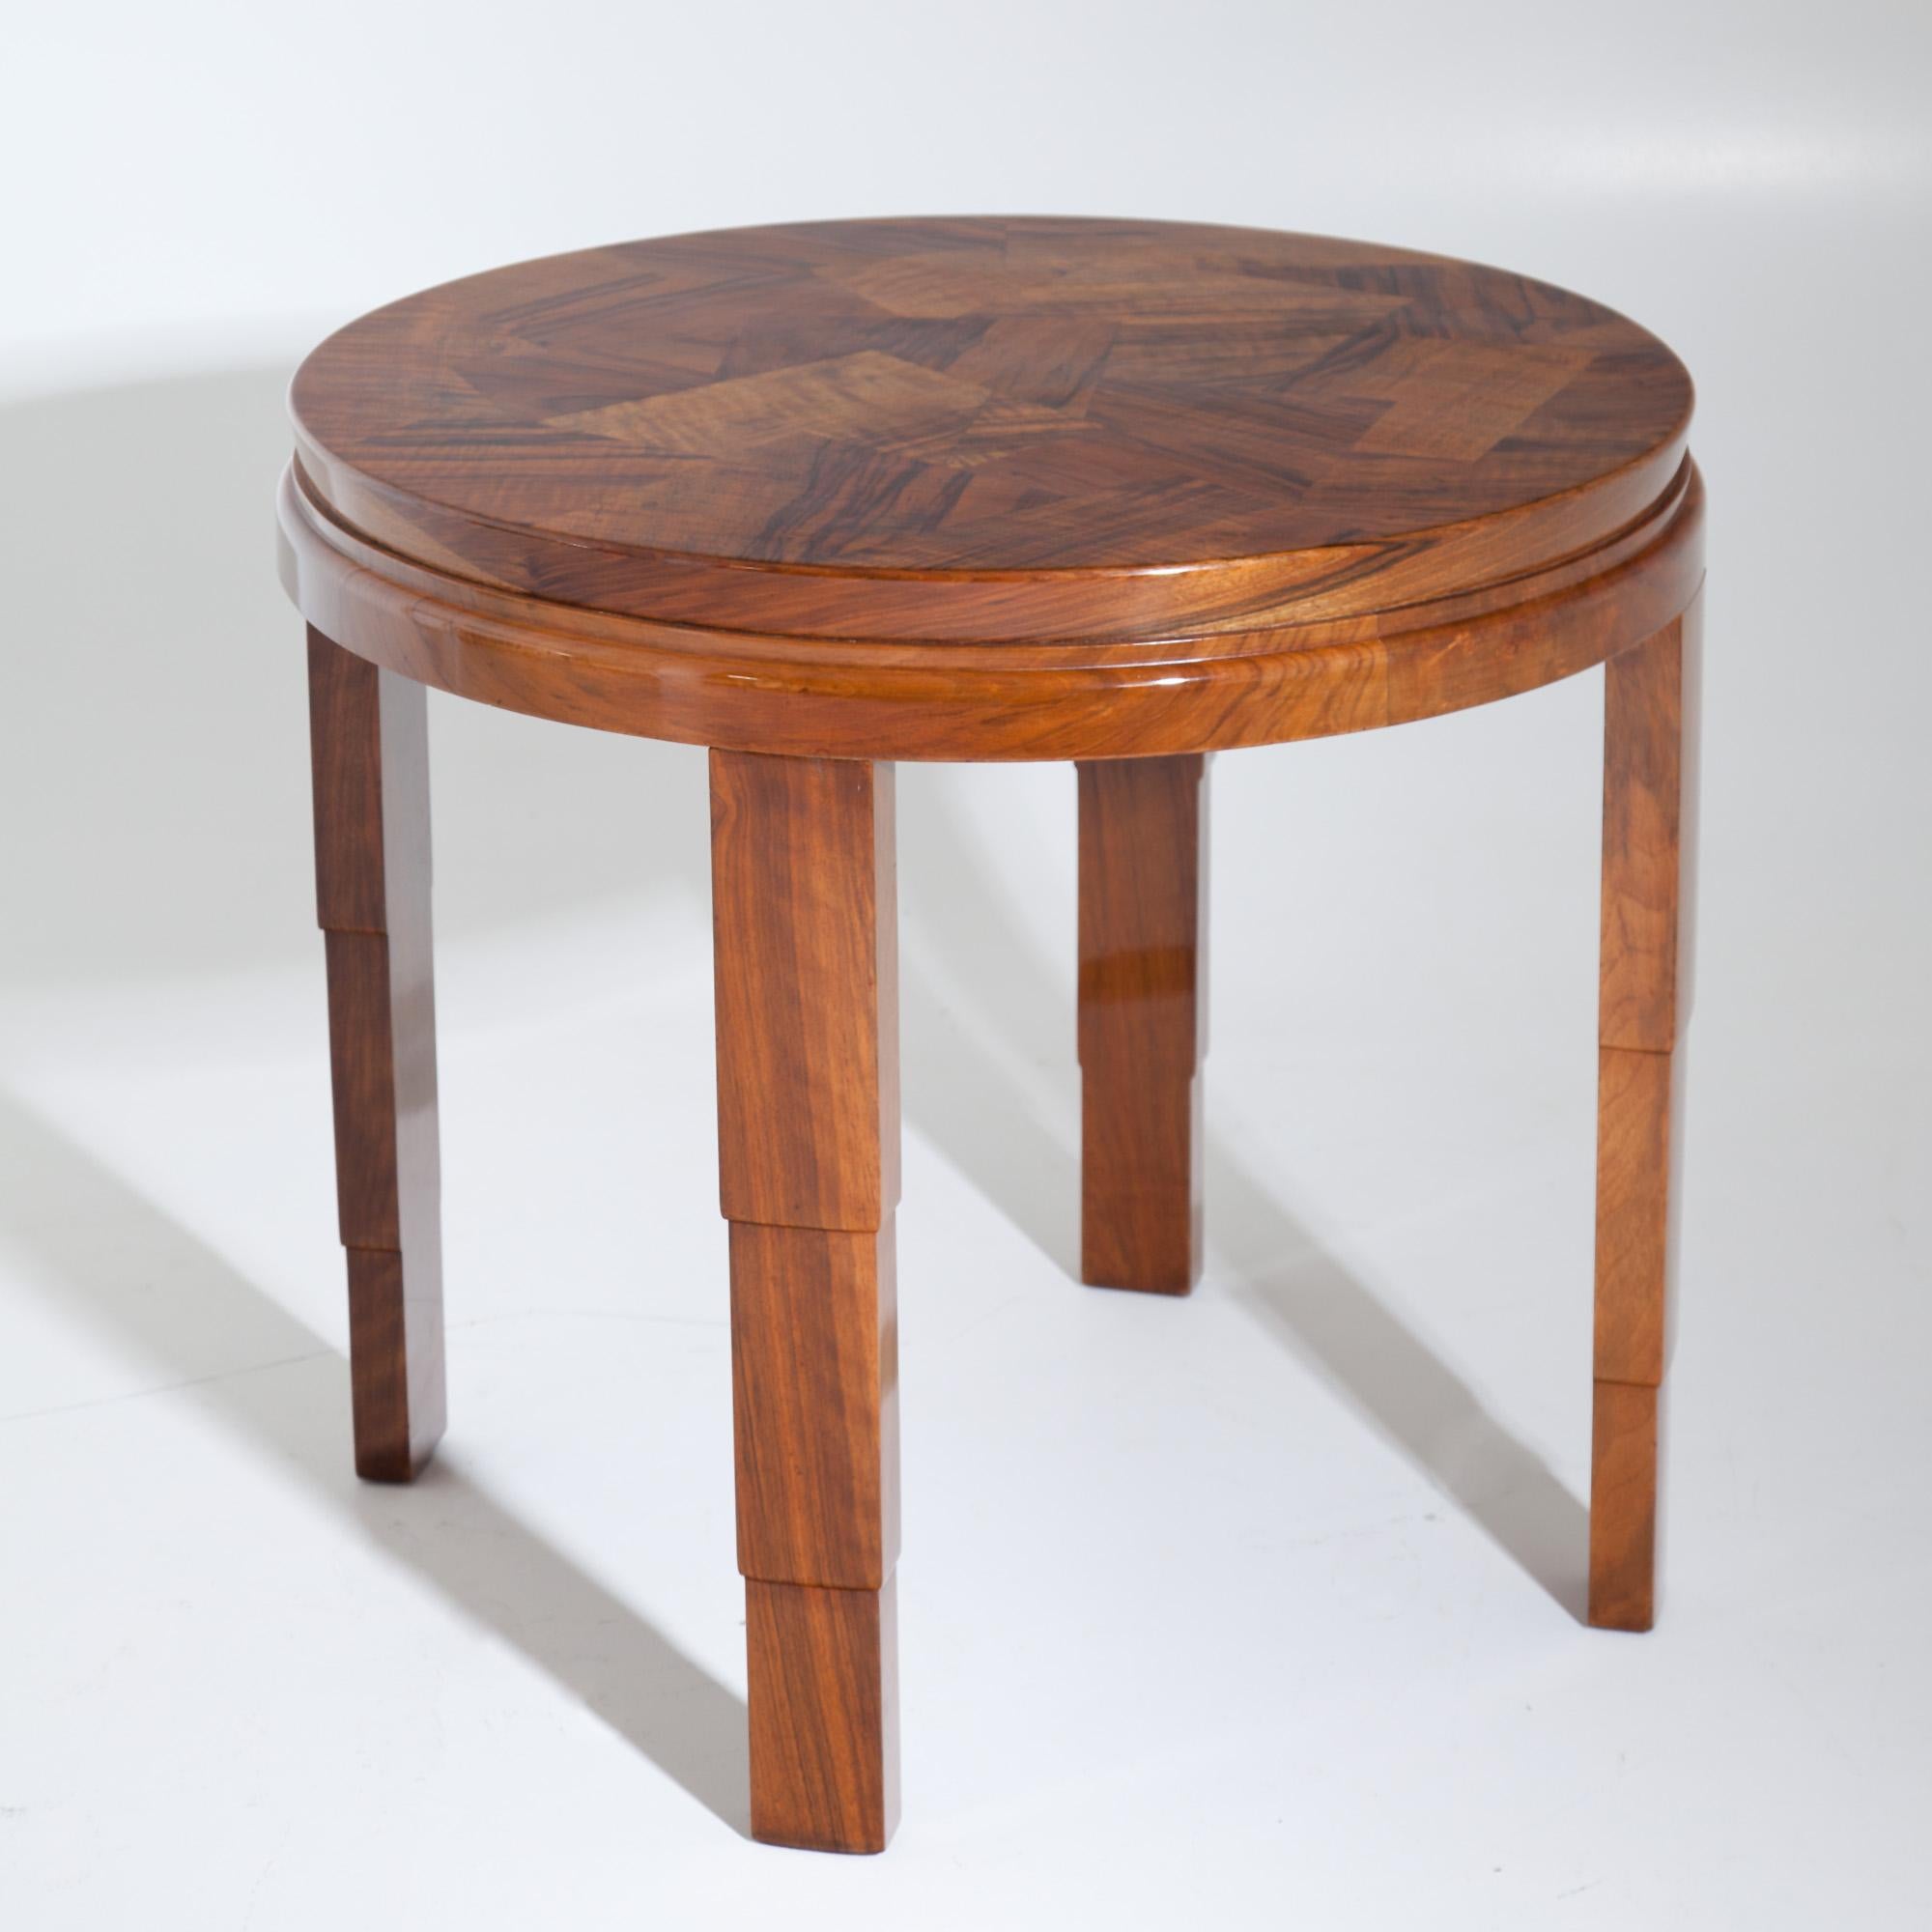 Round Art Deco table with asymmetrical walnut veneer on stepped legs. Stamped on the underside G. Weber FILS & Cie, Genève.